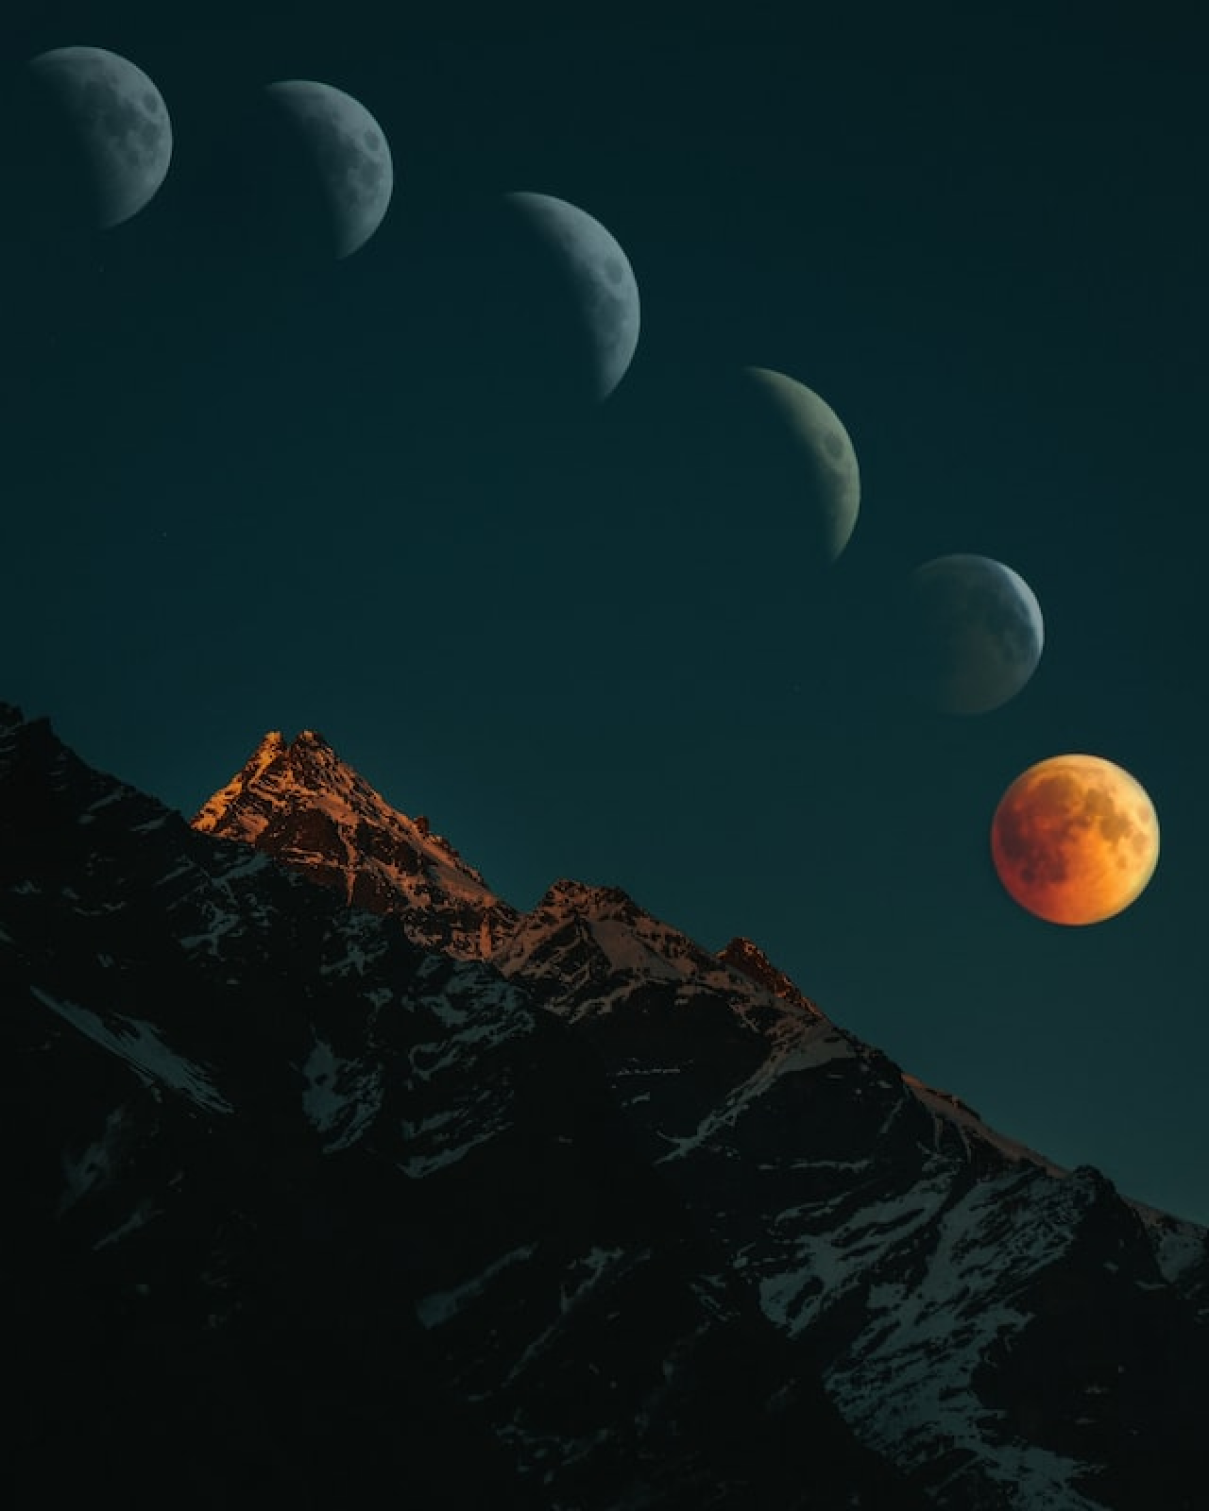 Mountains with landscape of the different phases of the moon